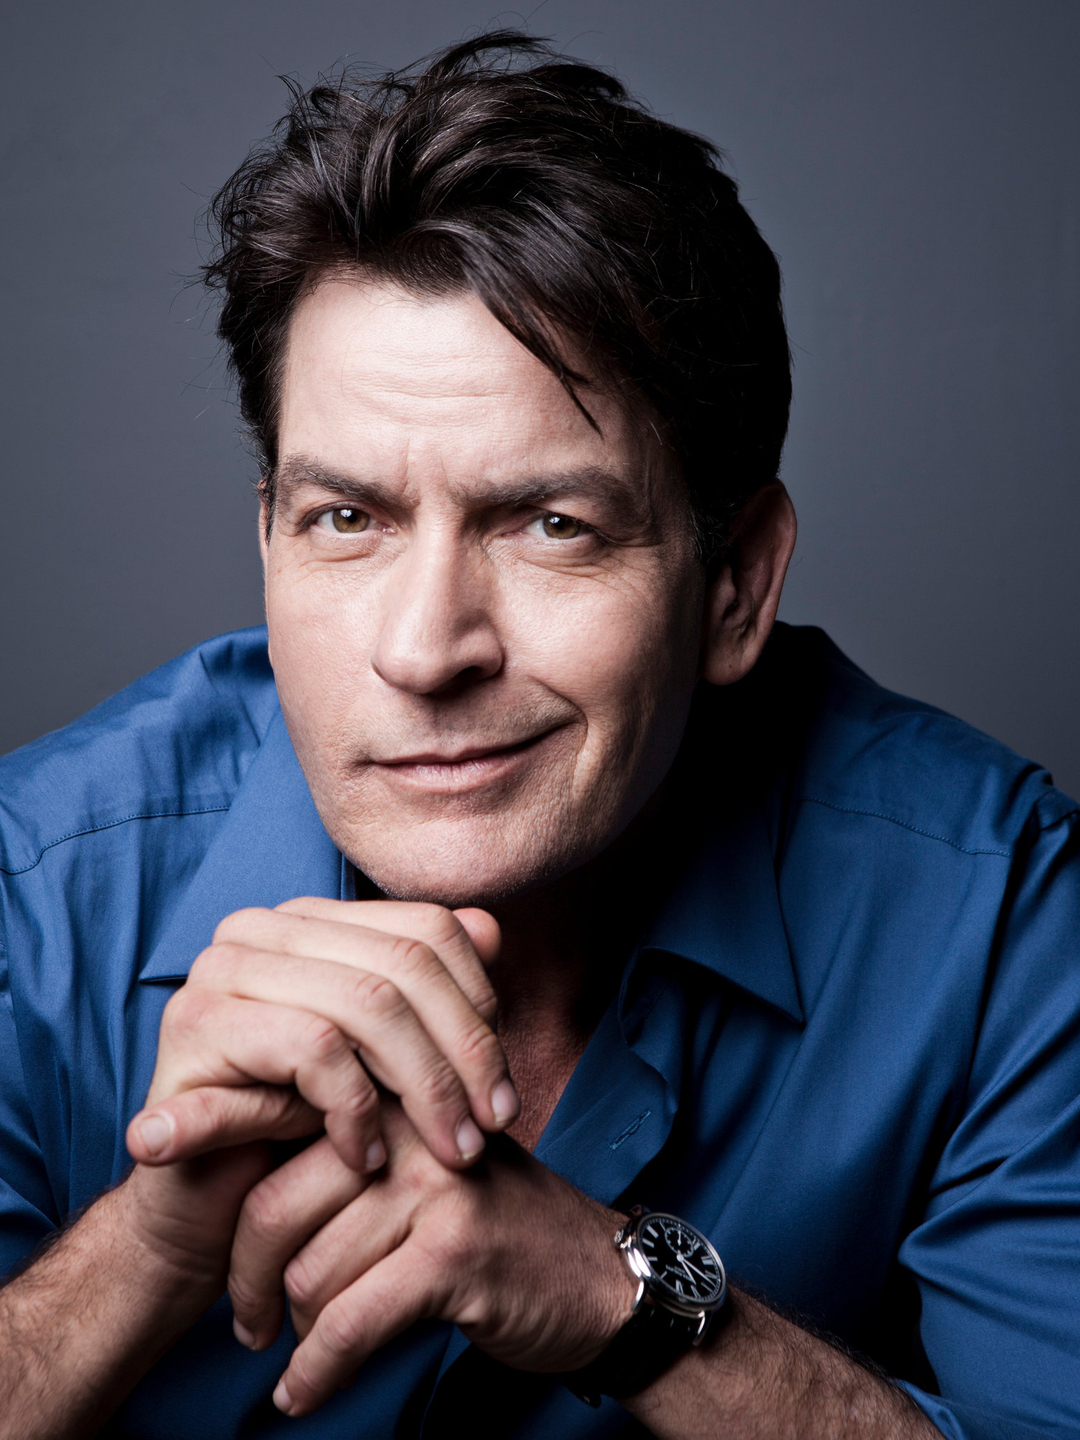 Charlie Sheen age